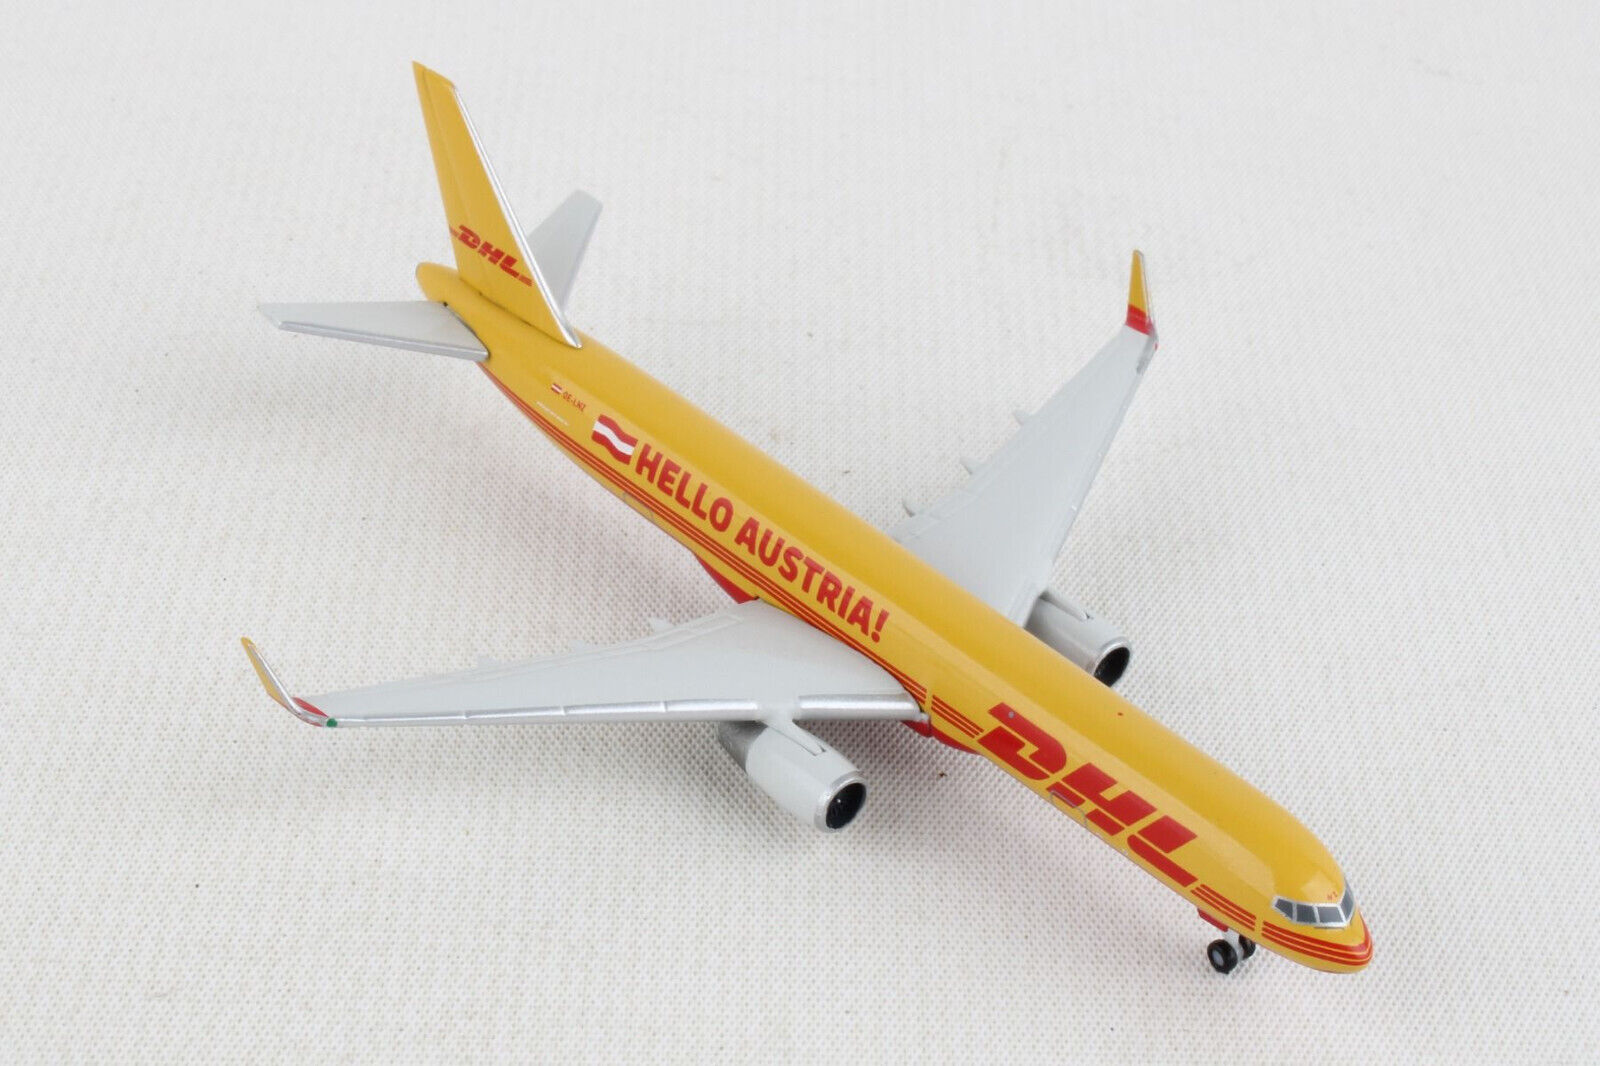 Herpa DHL Airlines Boeing 757-200 Airplane Model HE536516 1:500 Hello Austria